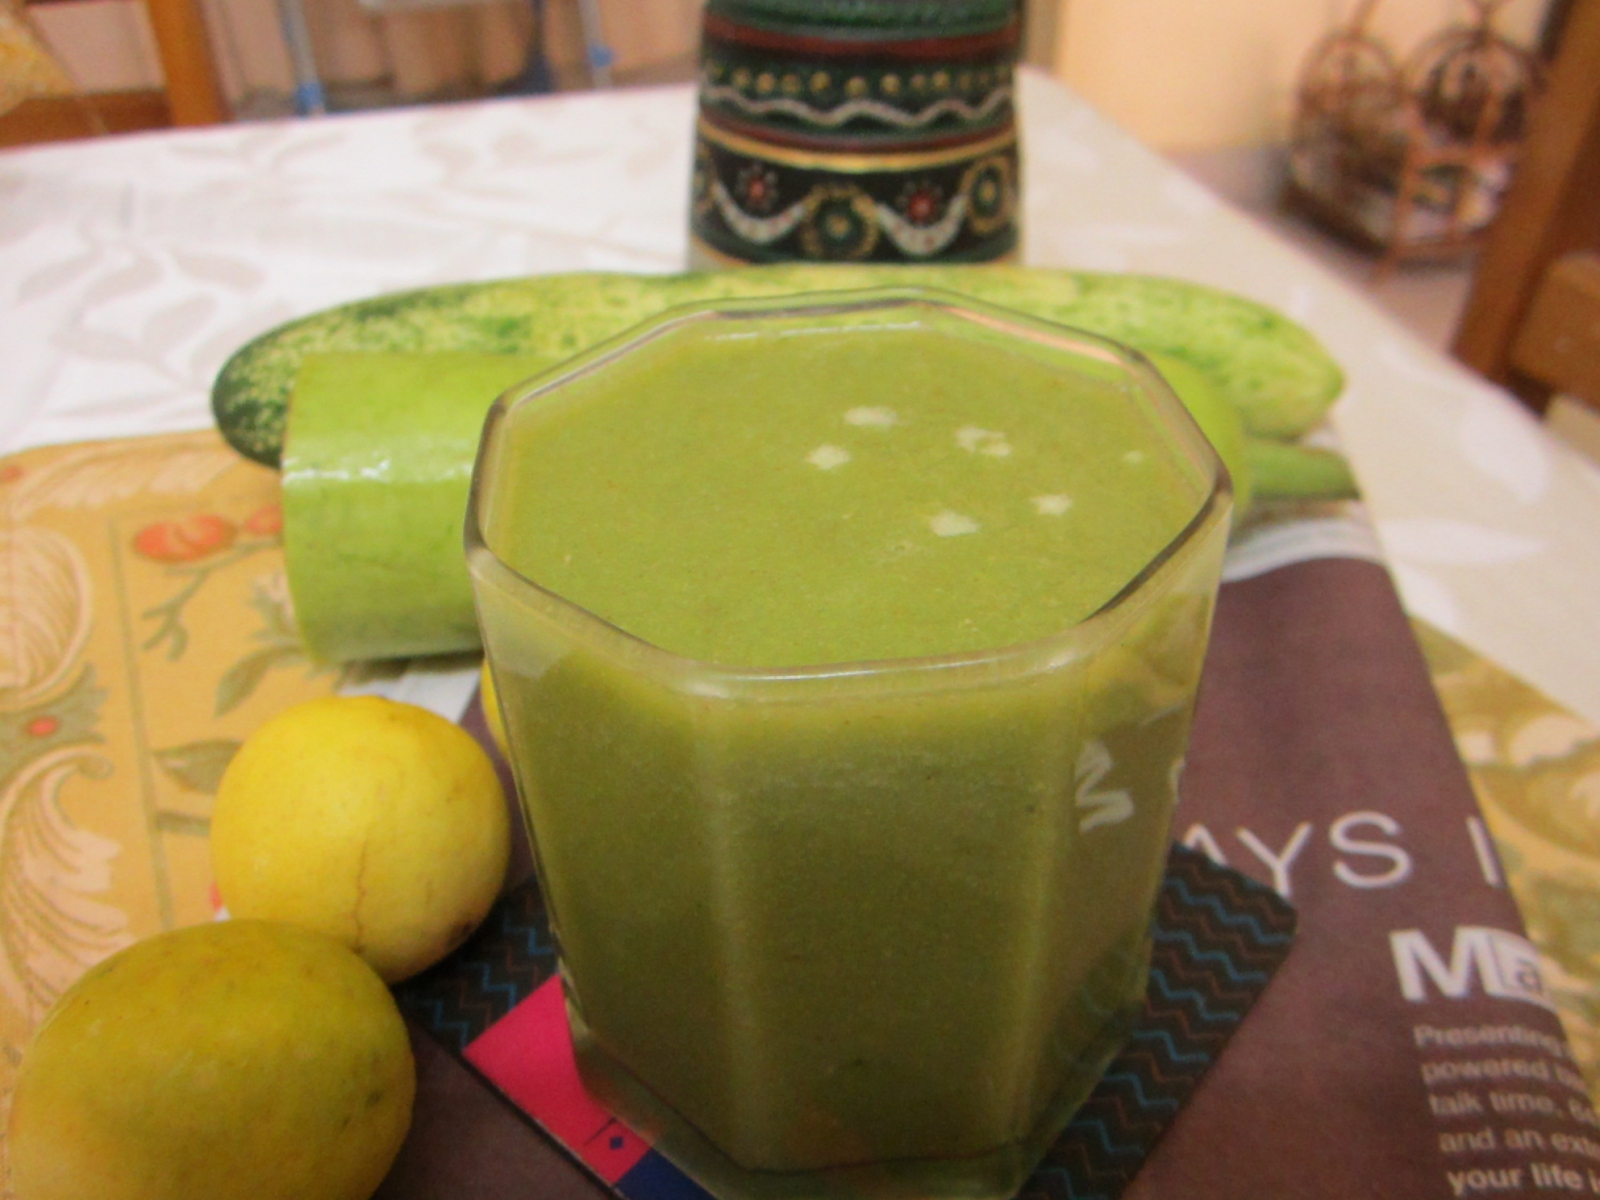 Spiced Bottle Gourd And Spinach Juice Recipe